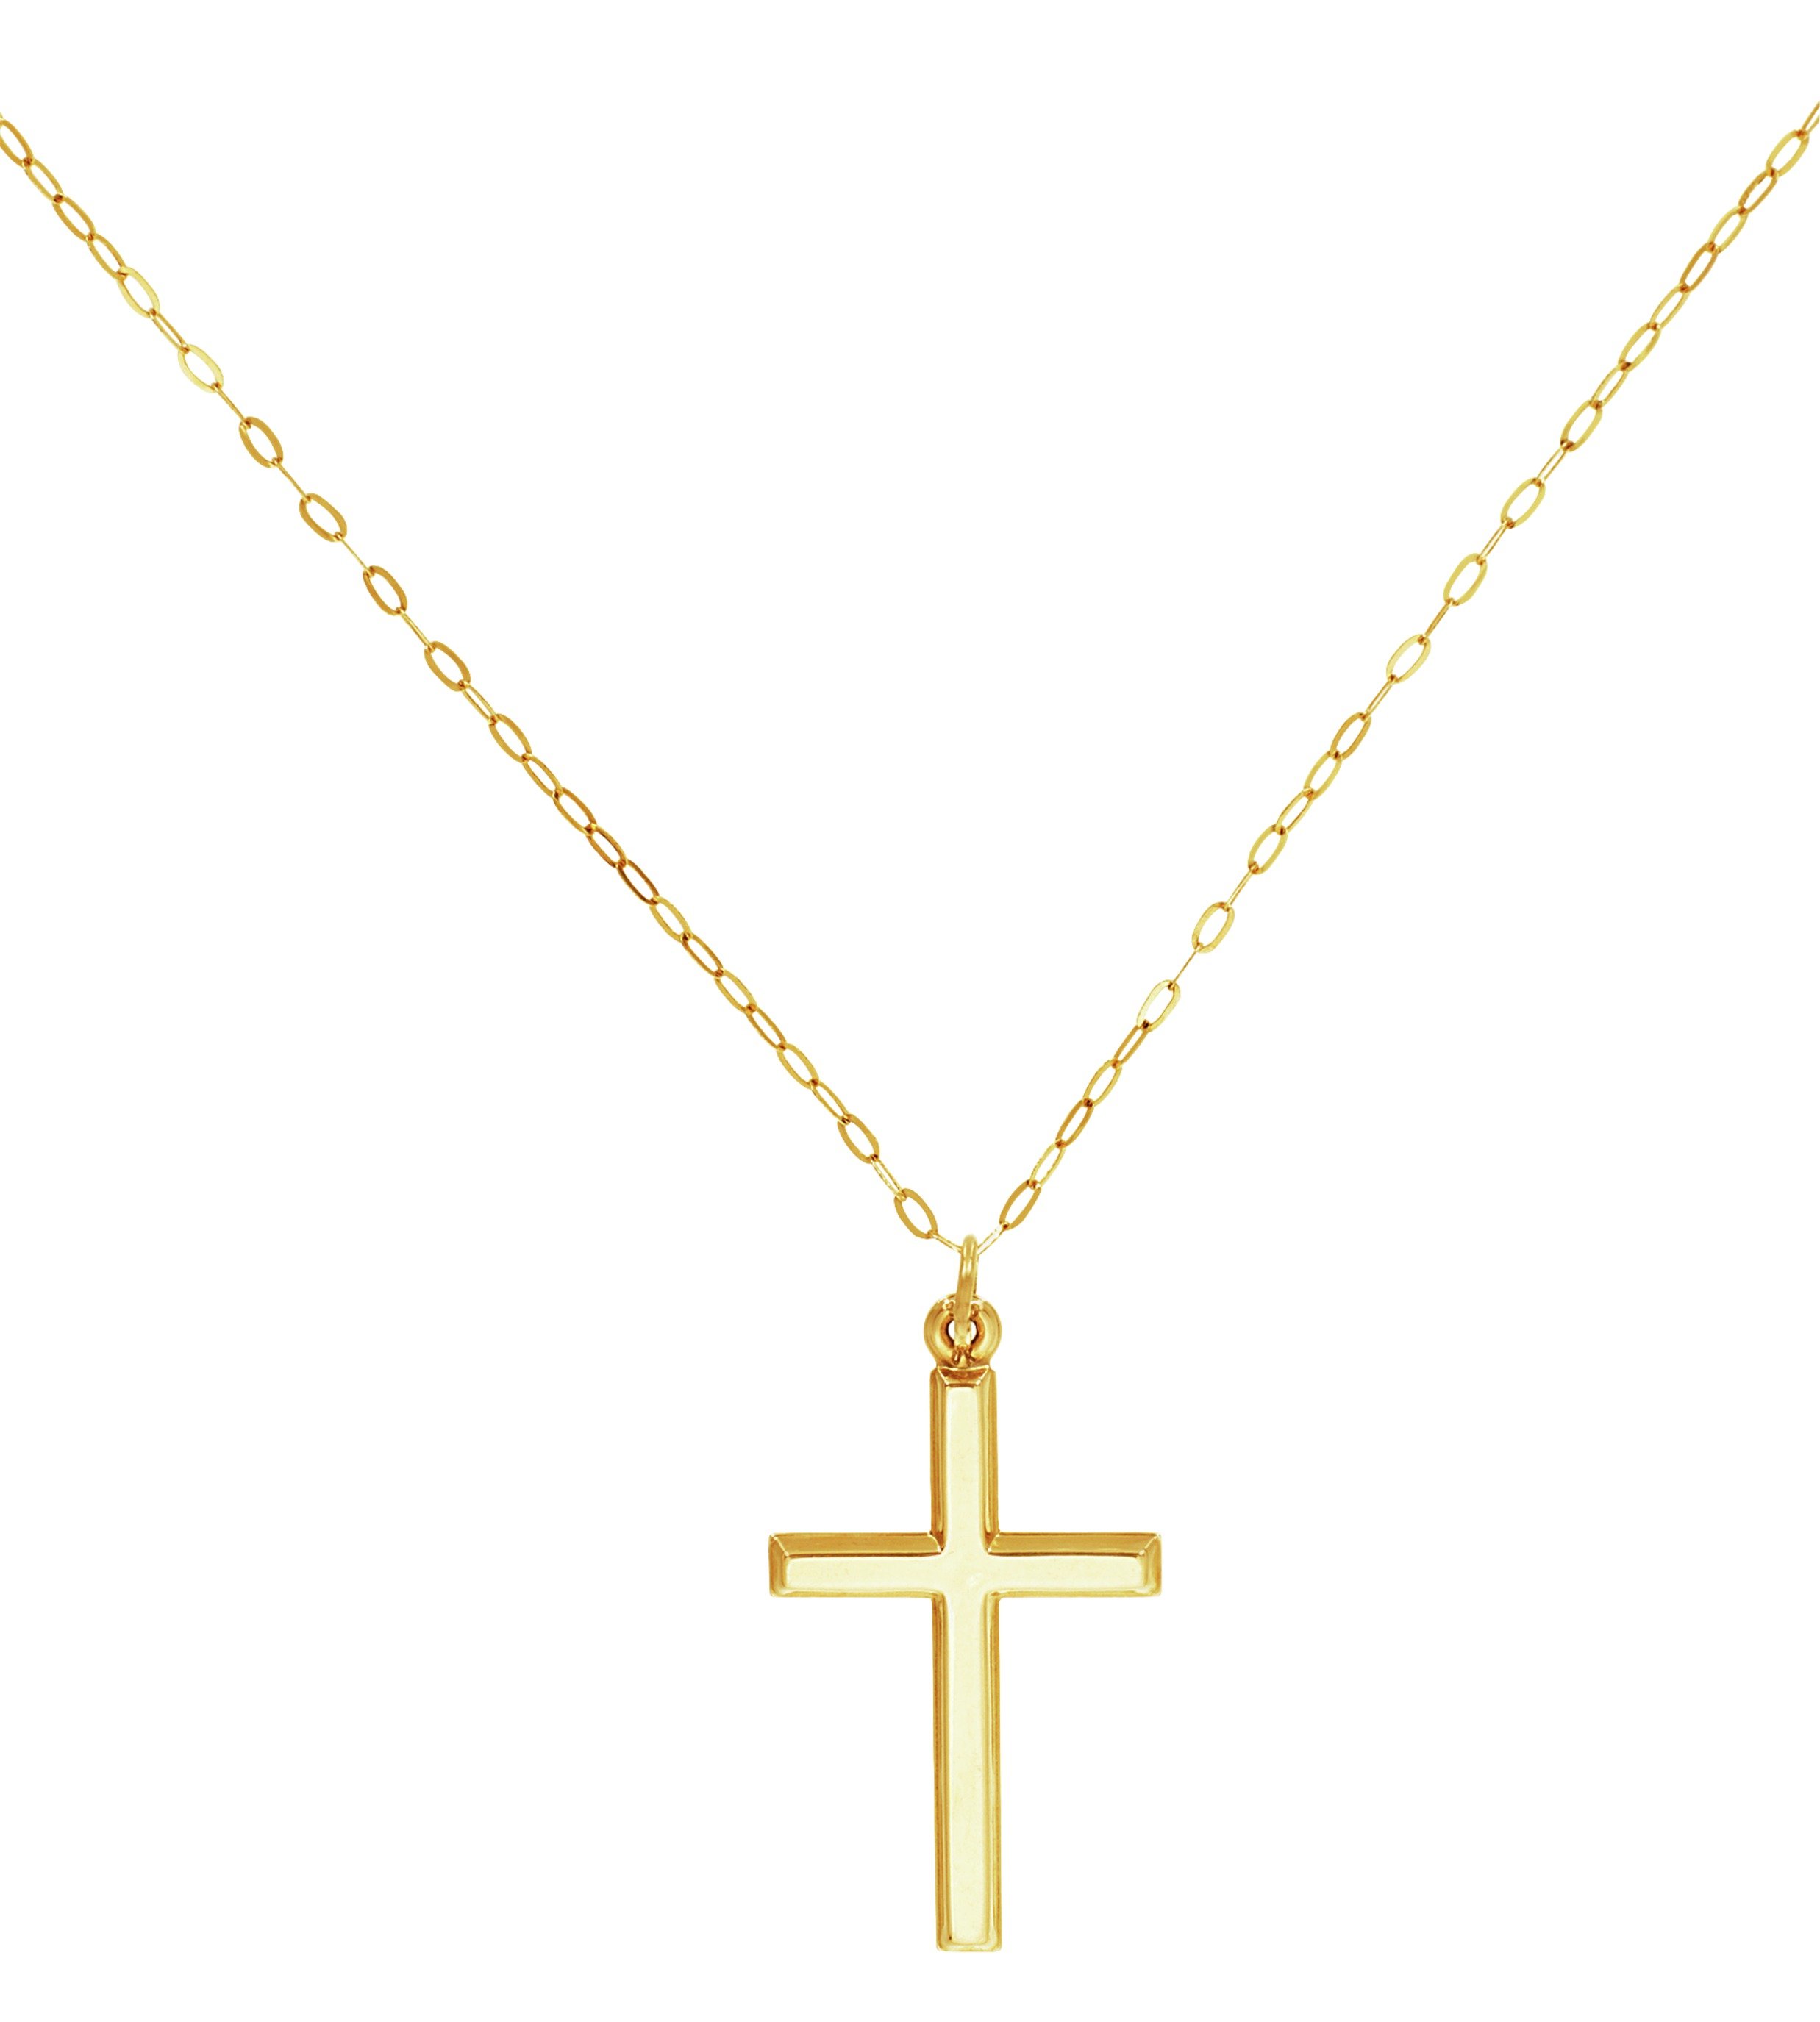 Revere 9ct Gold Double Sided Cross Pendant 16 Inch Necklace